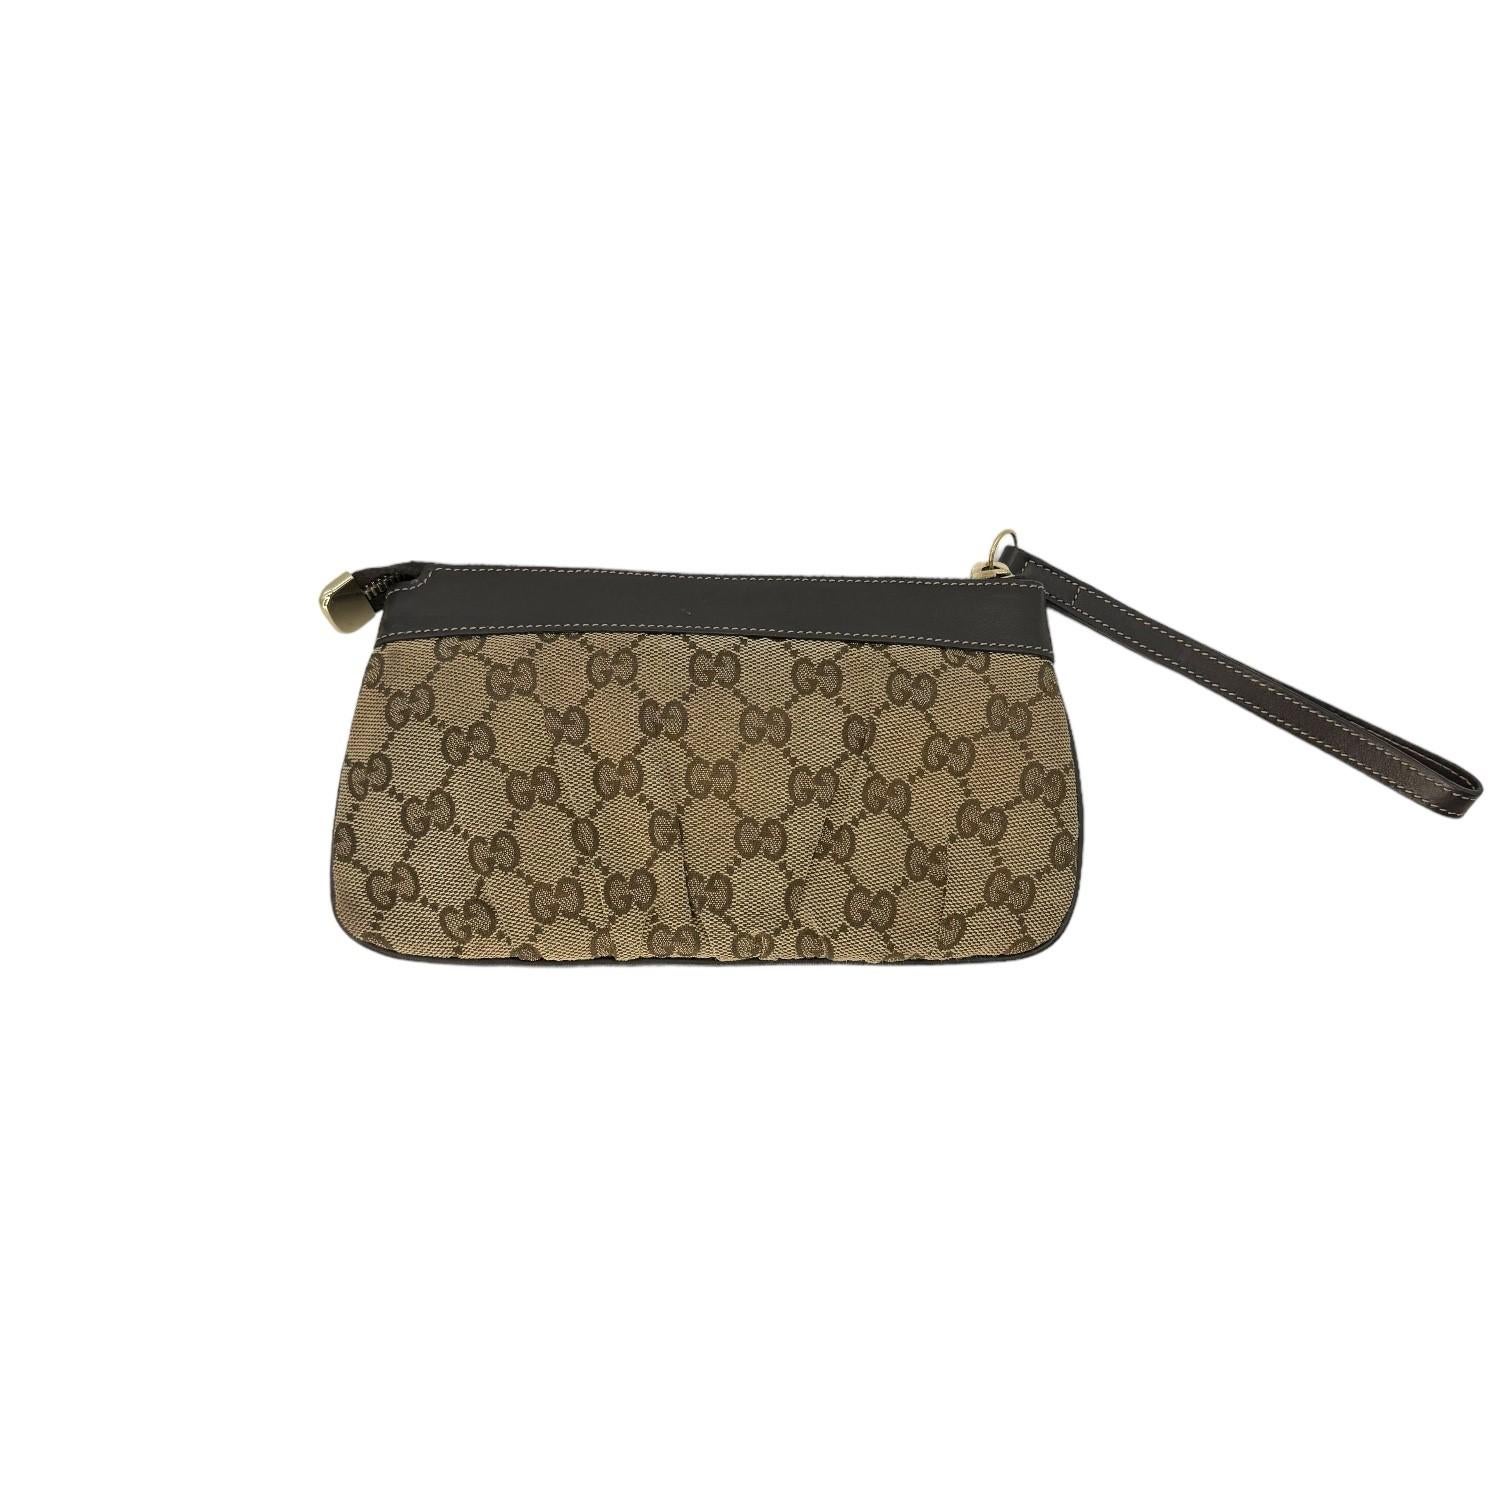 This Gucci Zip Pouch is finely crafted of the classic Gucci GG Monogram canvas exterior with leather trimming and gold-tone hardware. It has a zipper closure that opens up to a brown nylon and leather interior with multiple card slots. This Gucci